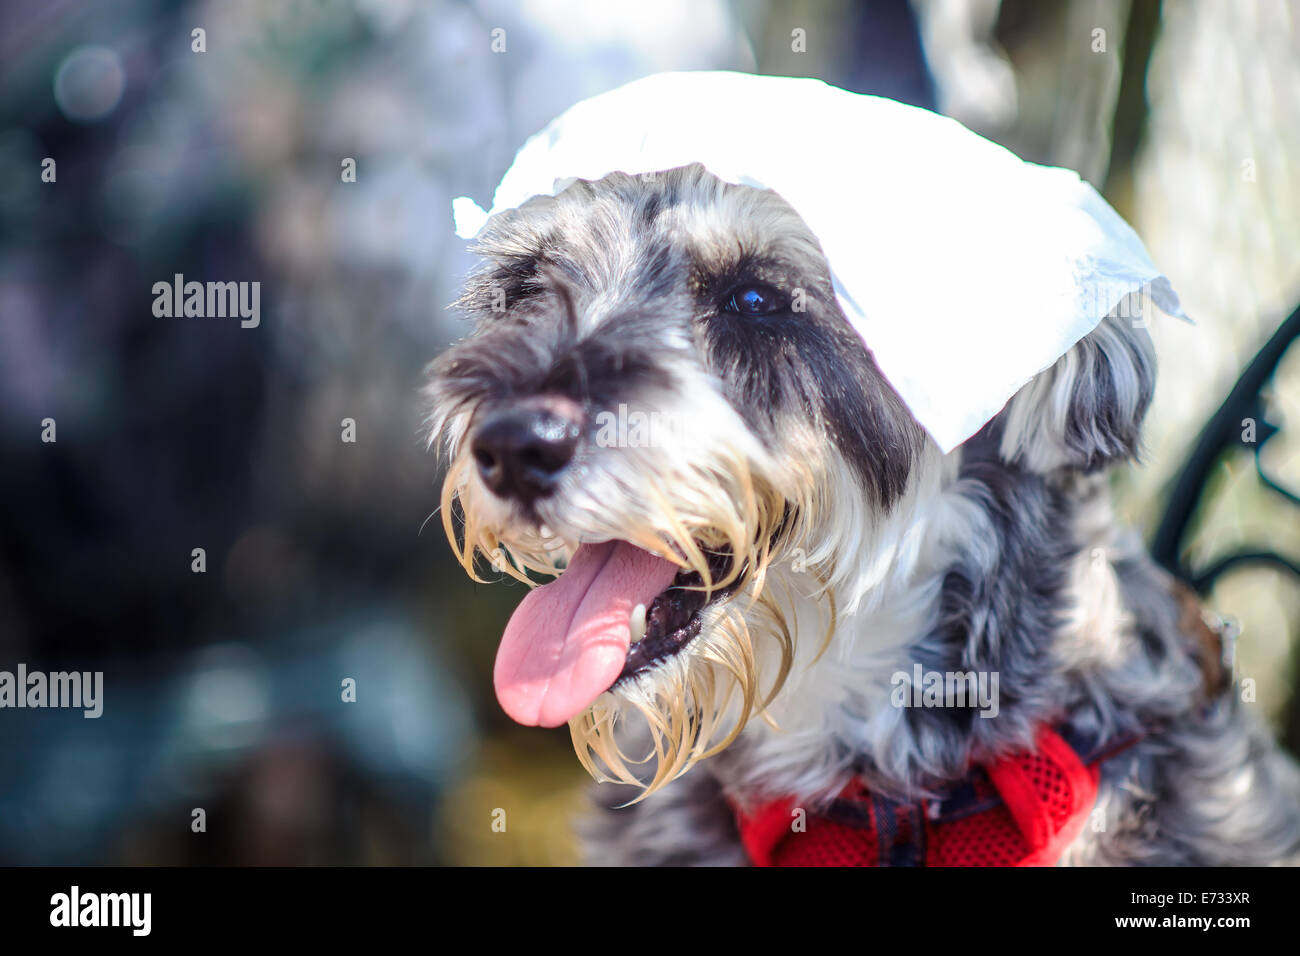 Miniature Schnauzer feel hot for adv or others purpose use Stock Photo